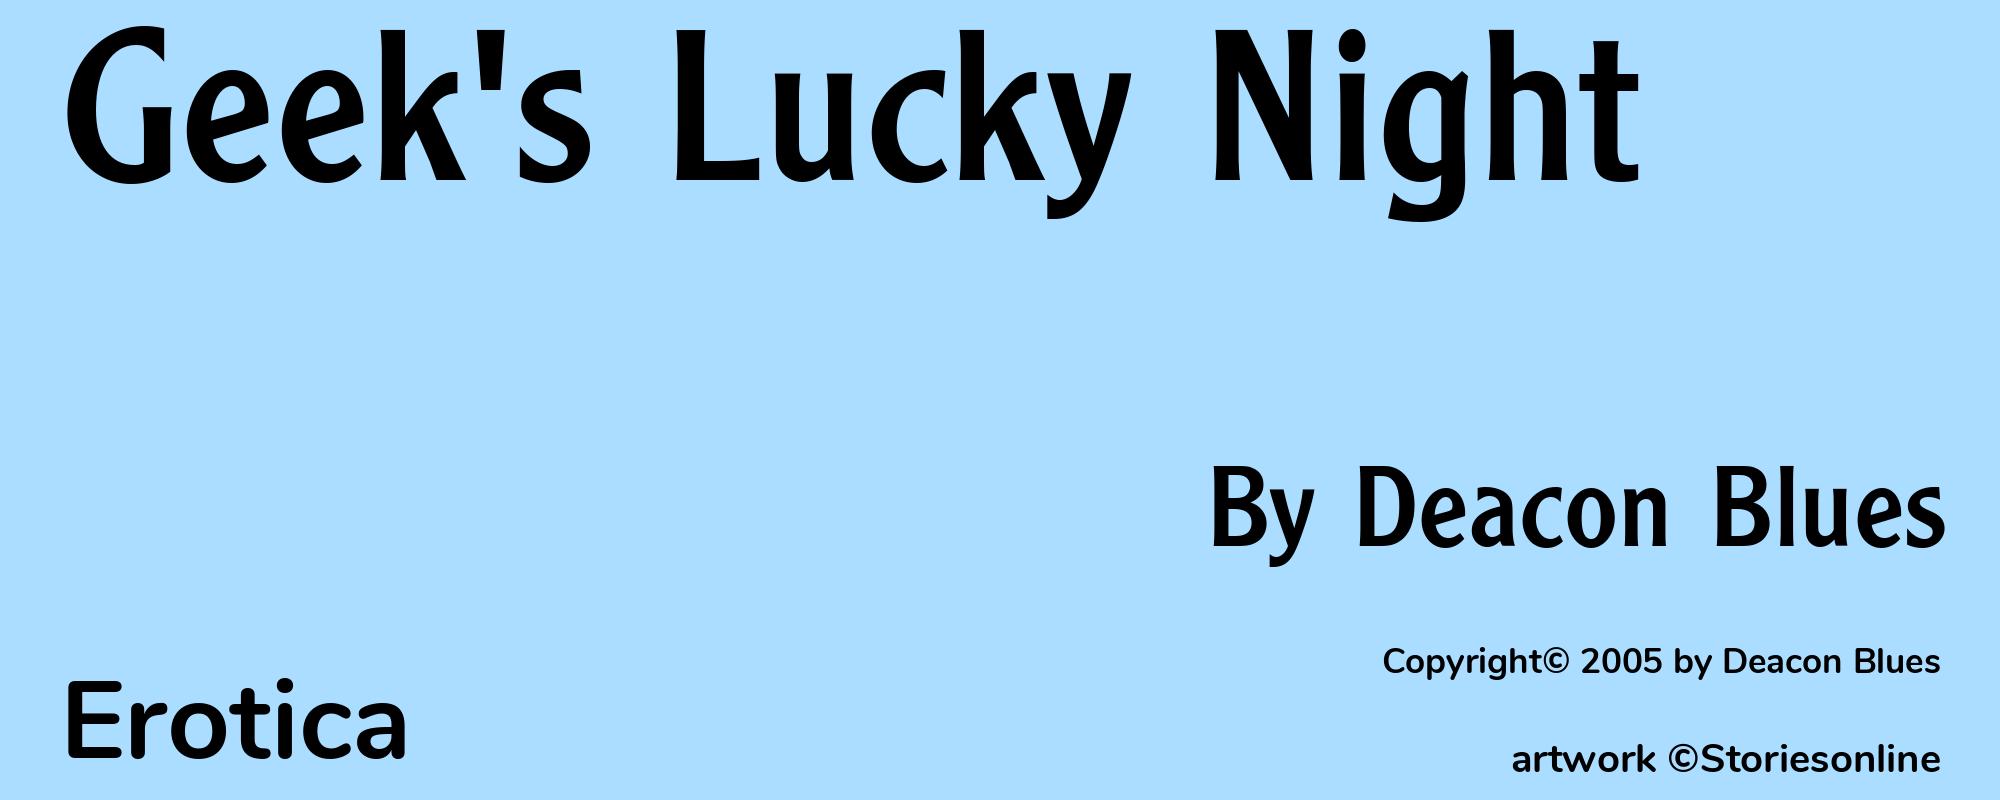 Geek's Lucky Night - Cover